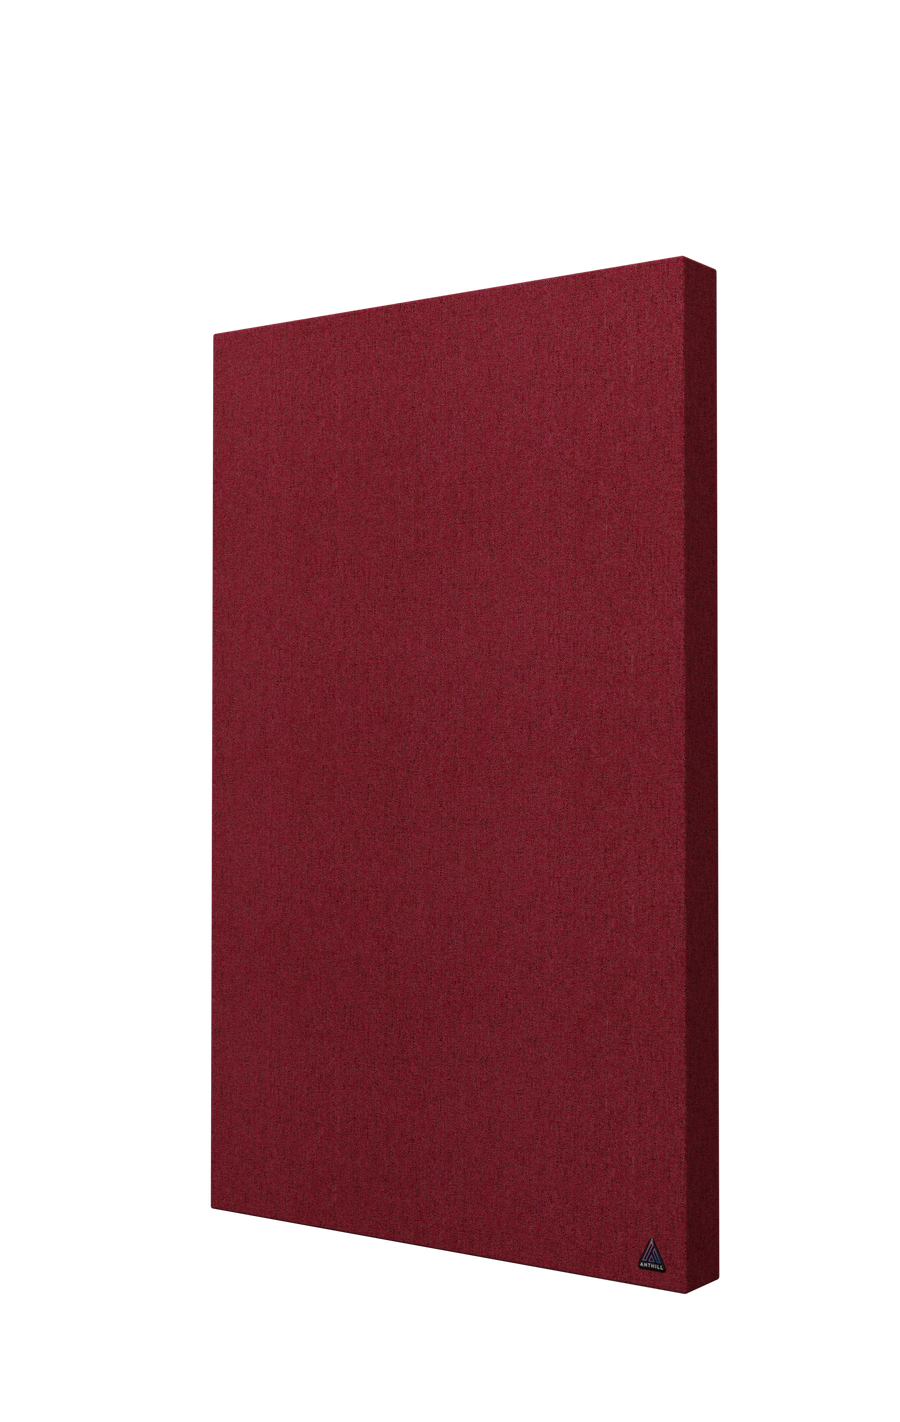 Anthill SLIM Broadband Absorber / Acoustic Panel red